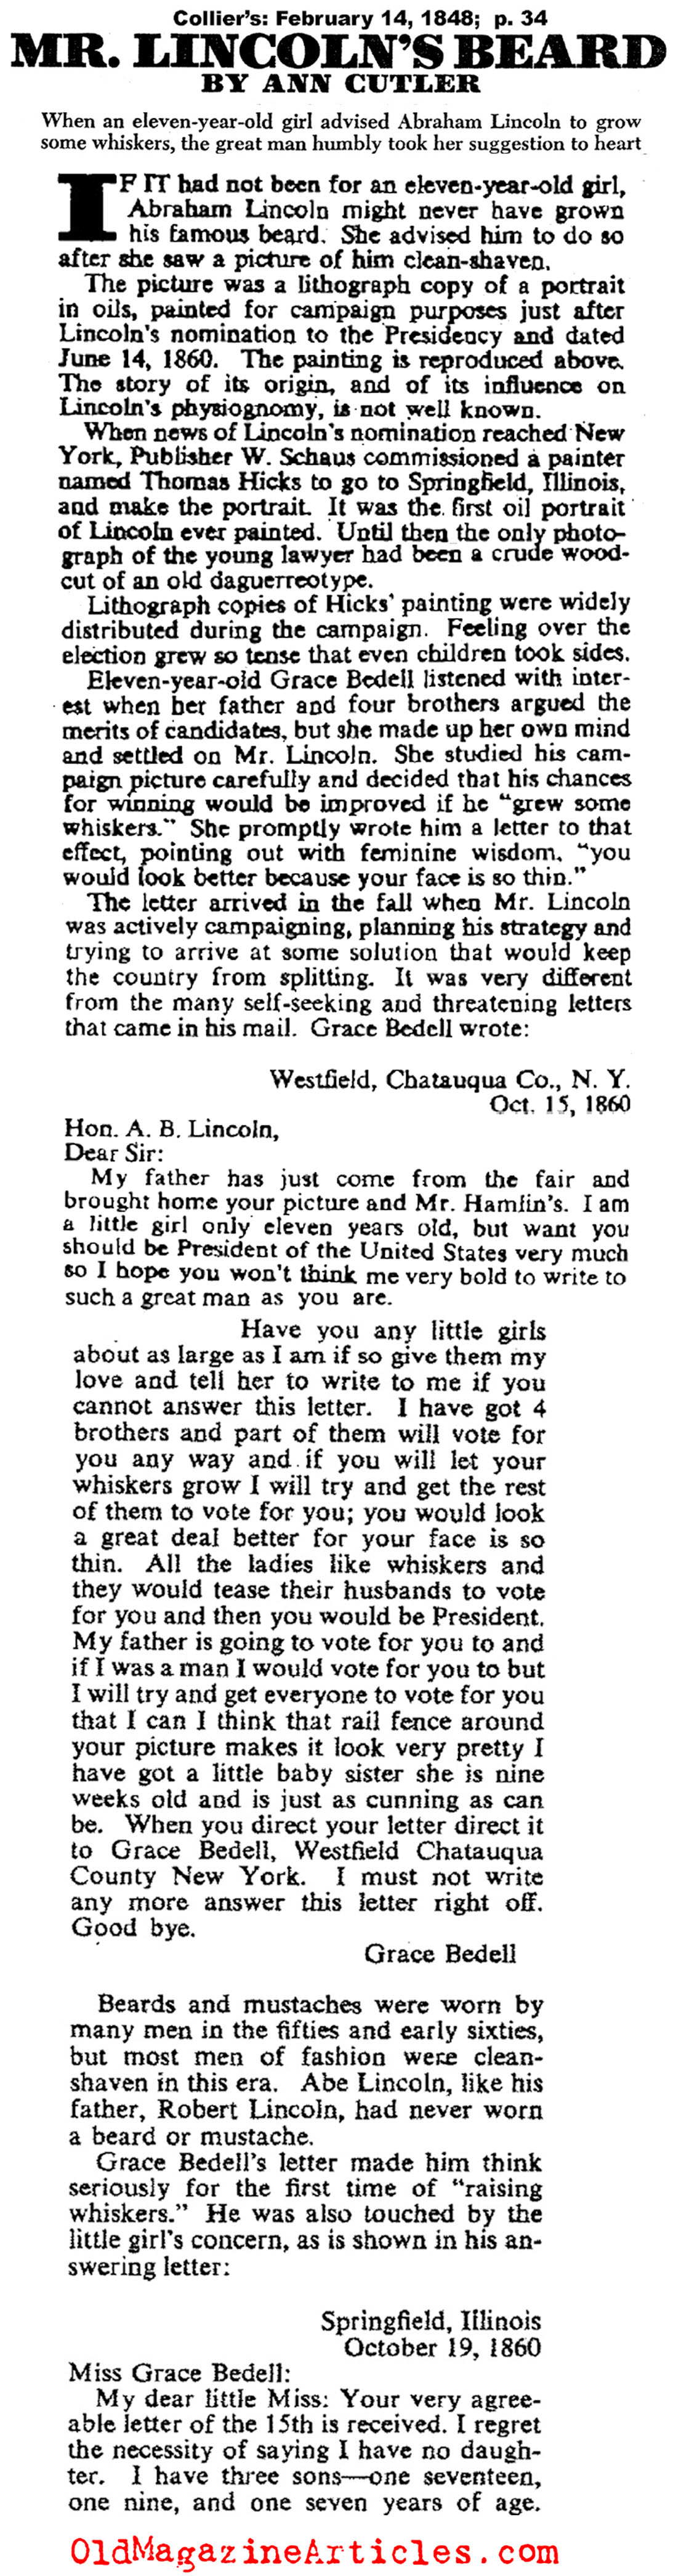 Did President Lincoln Really Need the Beard? (Collier's Magazine, 1948)